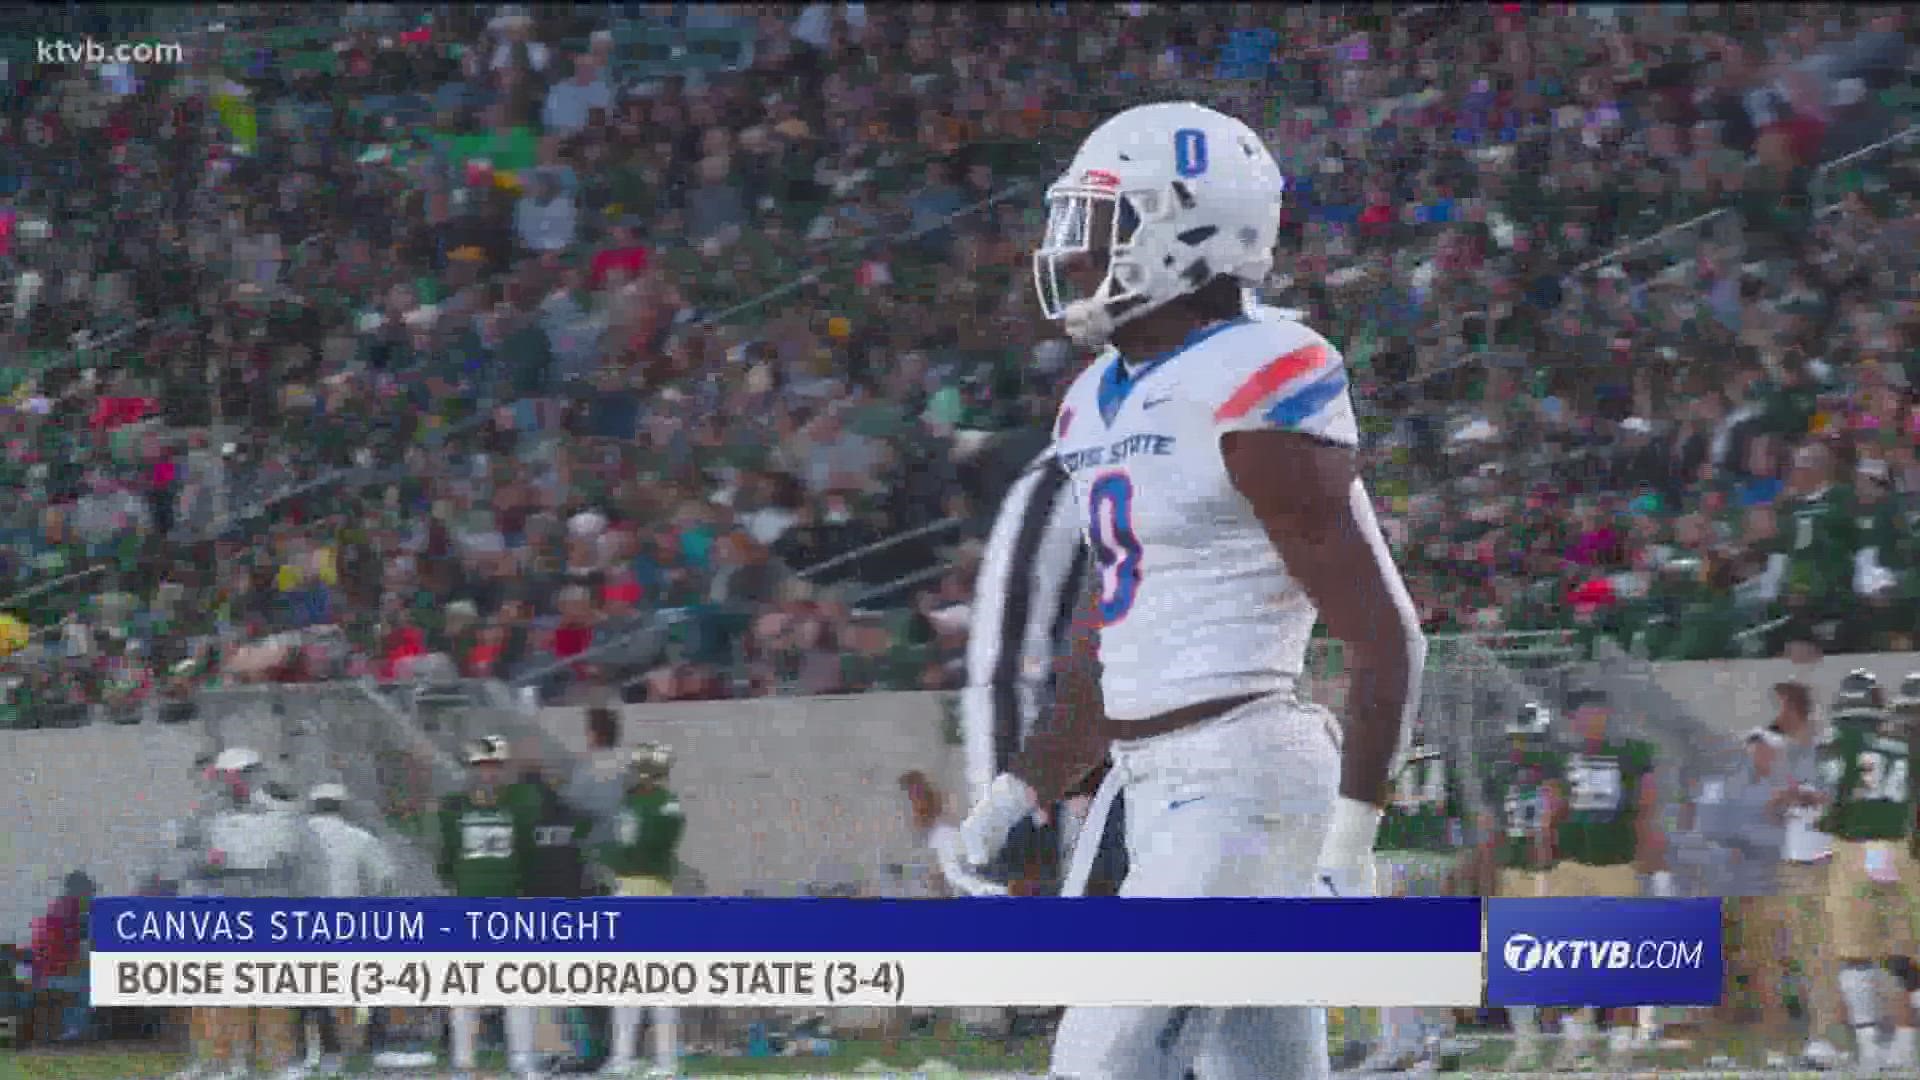 After trailing early to the Rams, the Boise State Broncos showed resiliency after they came back to win 28-19.